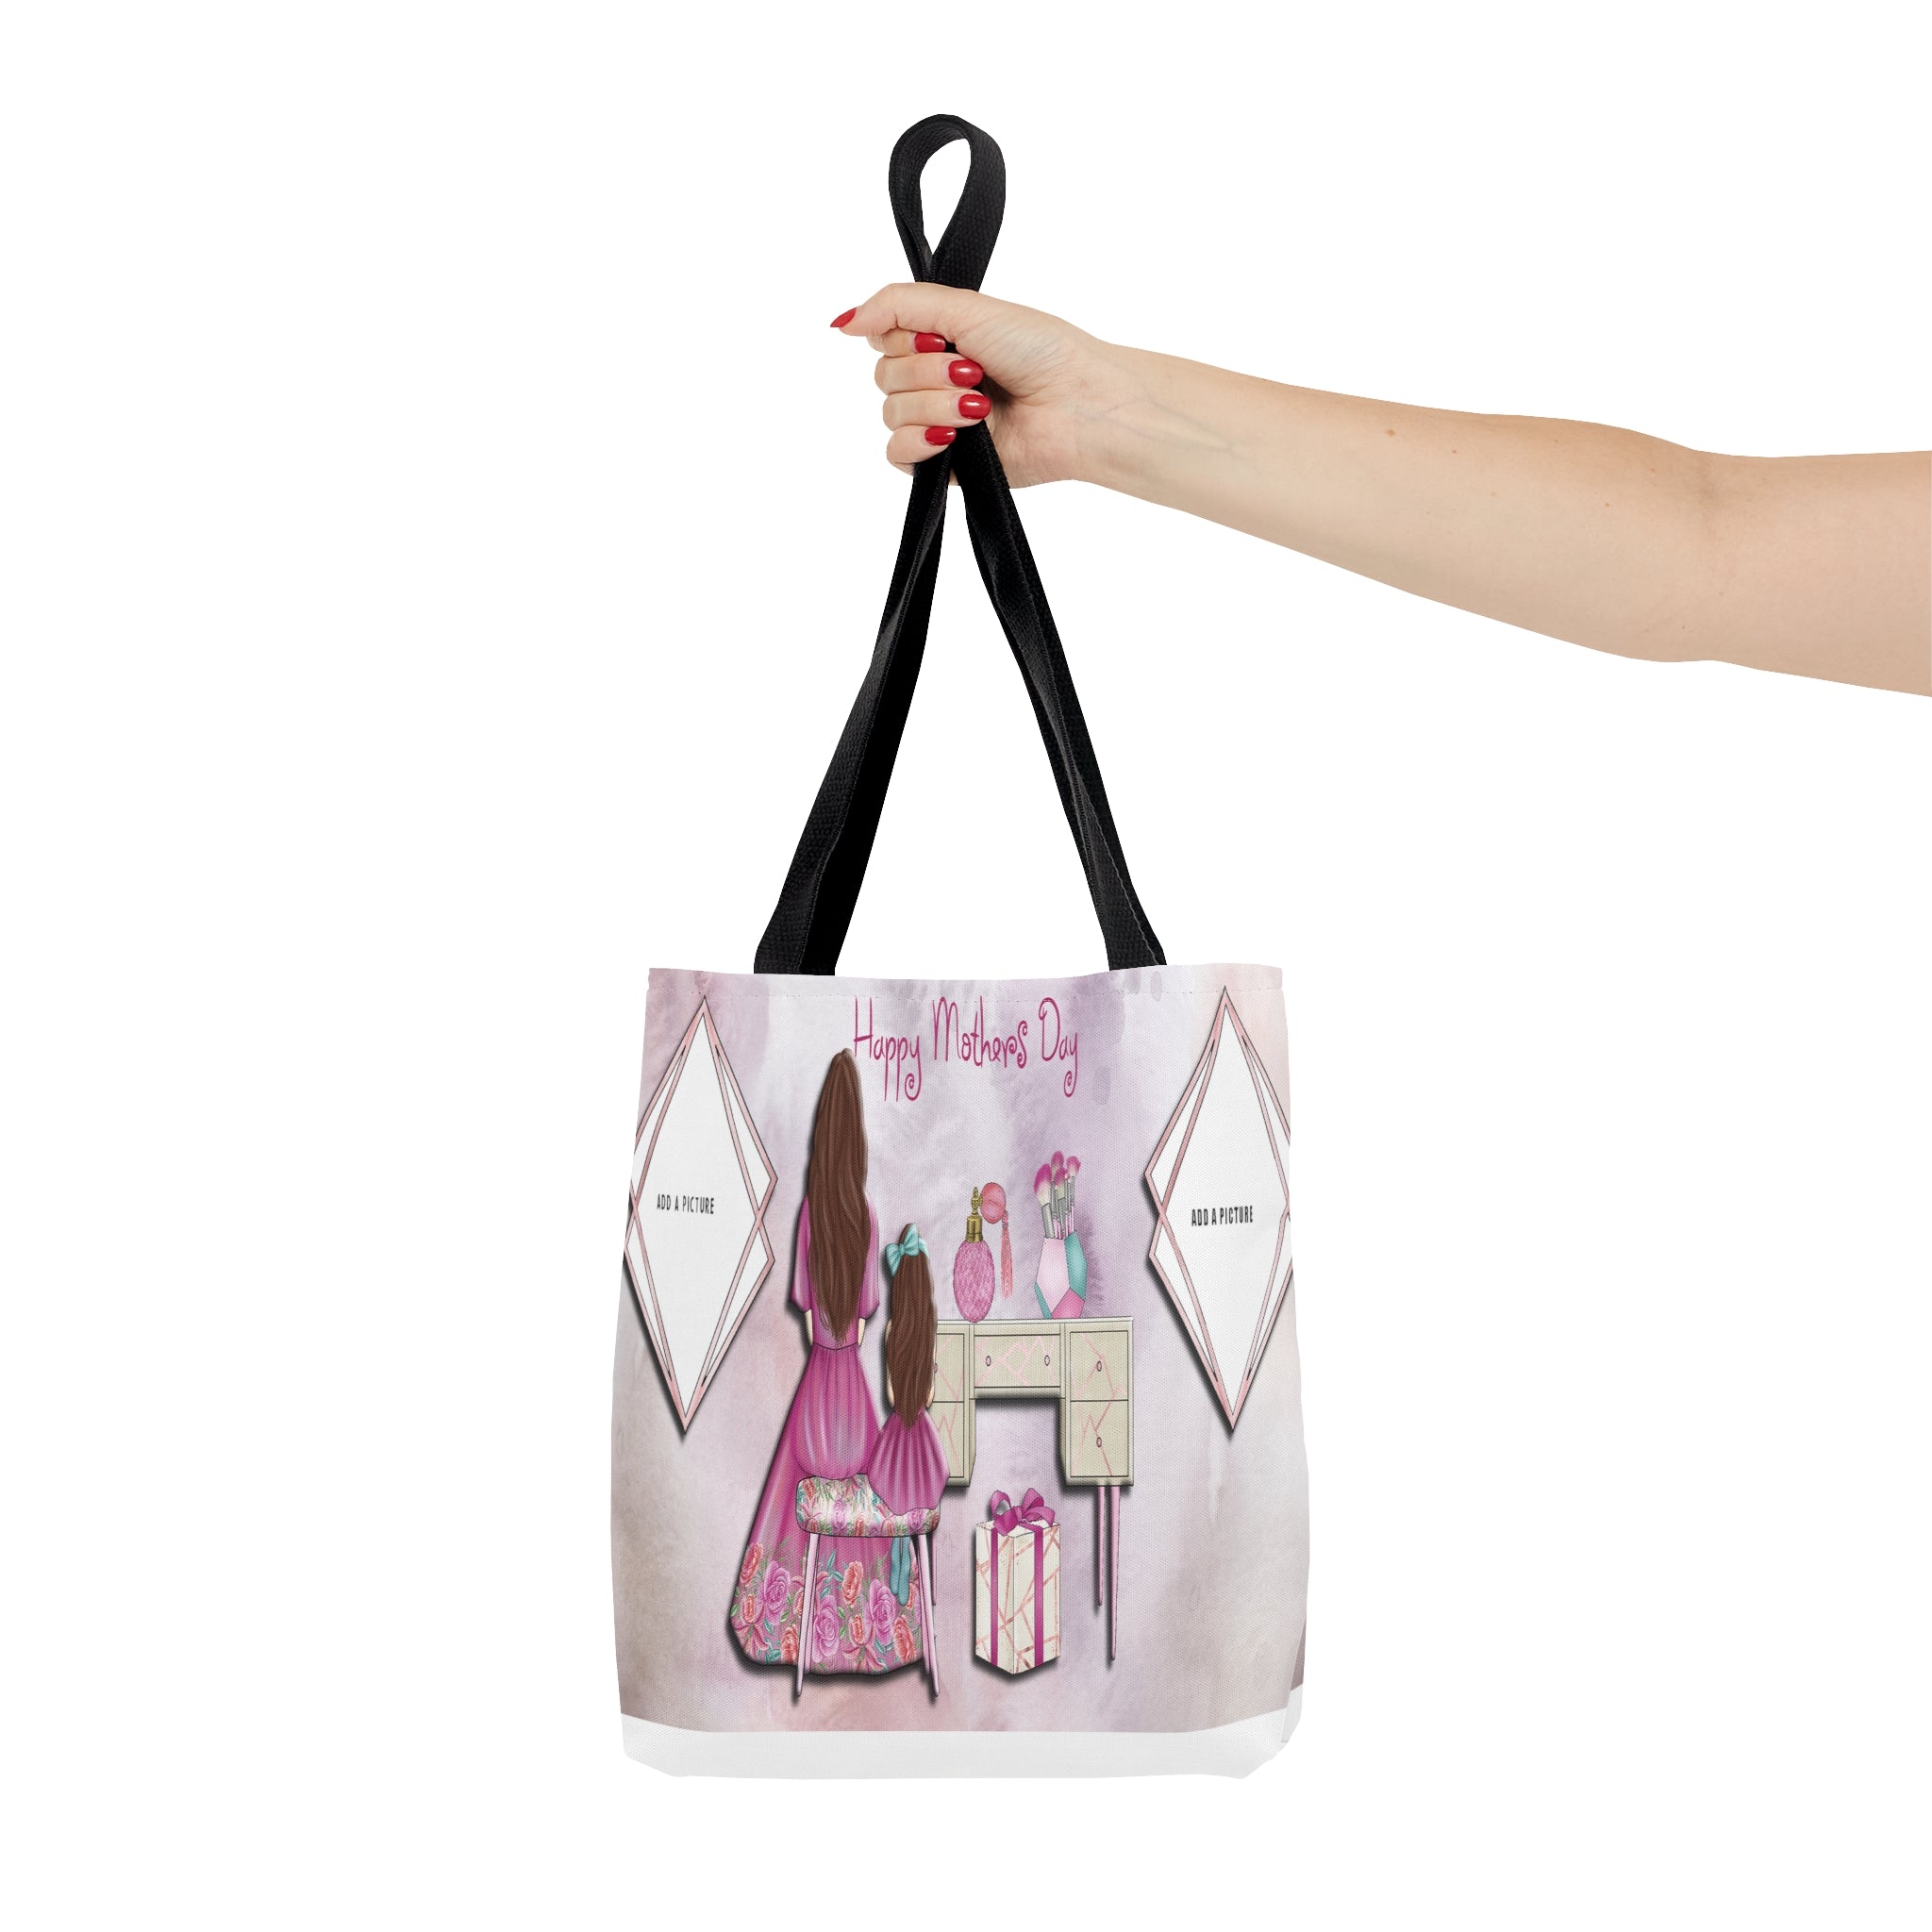 Happy Mothers Day Tote Bag (ADD A PICTURE)